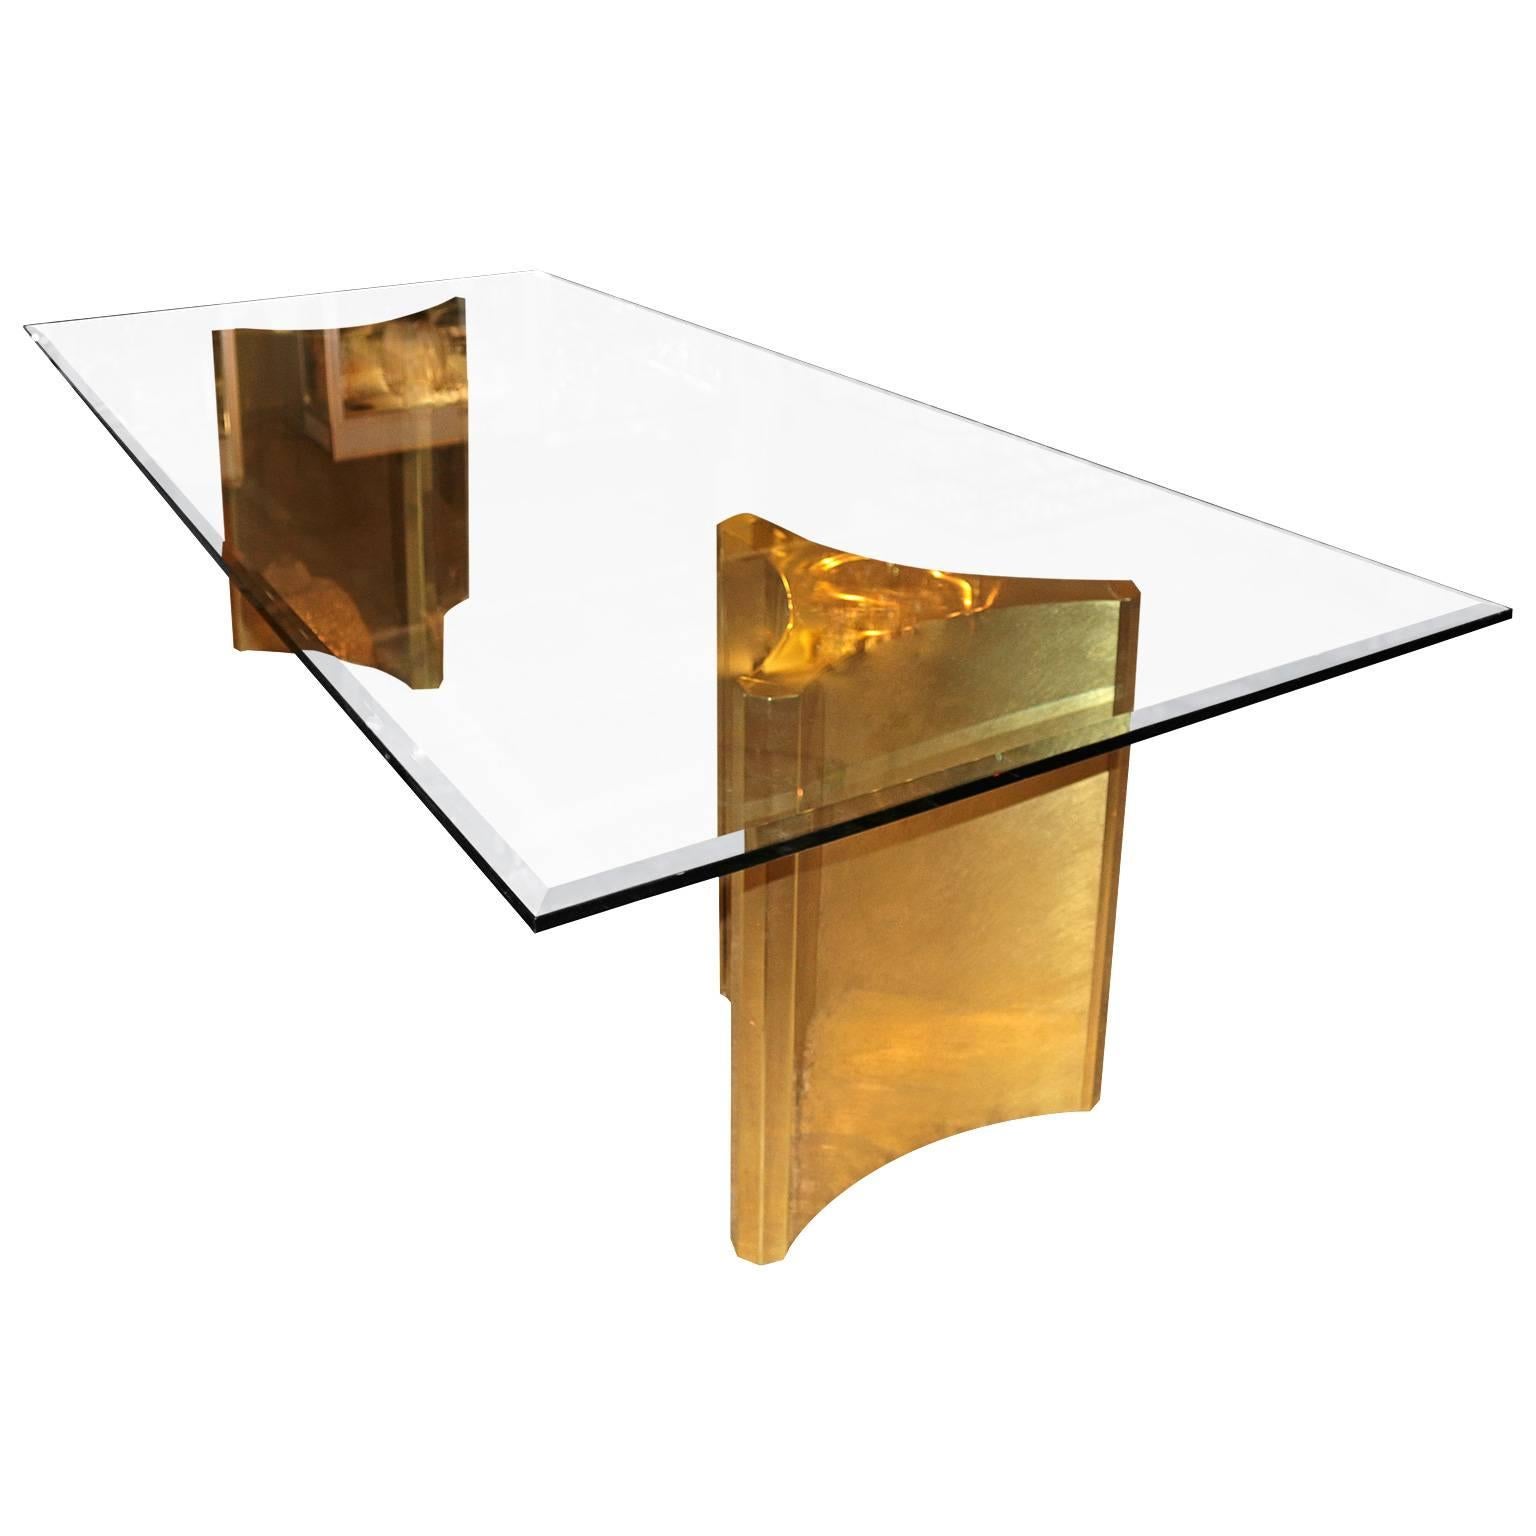 Stunning dining table by Mastercraft with a pair; brass pedestals. The table is newly polished and is in excellent condition, the glass is original and it has a gorgeous bevel to match its sleek look.